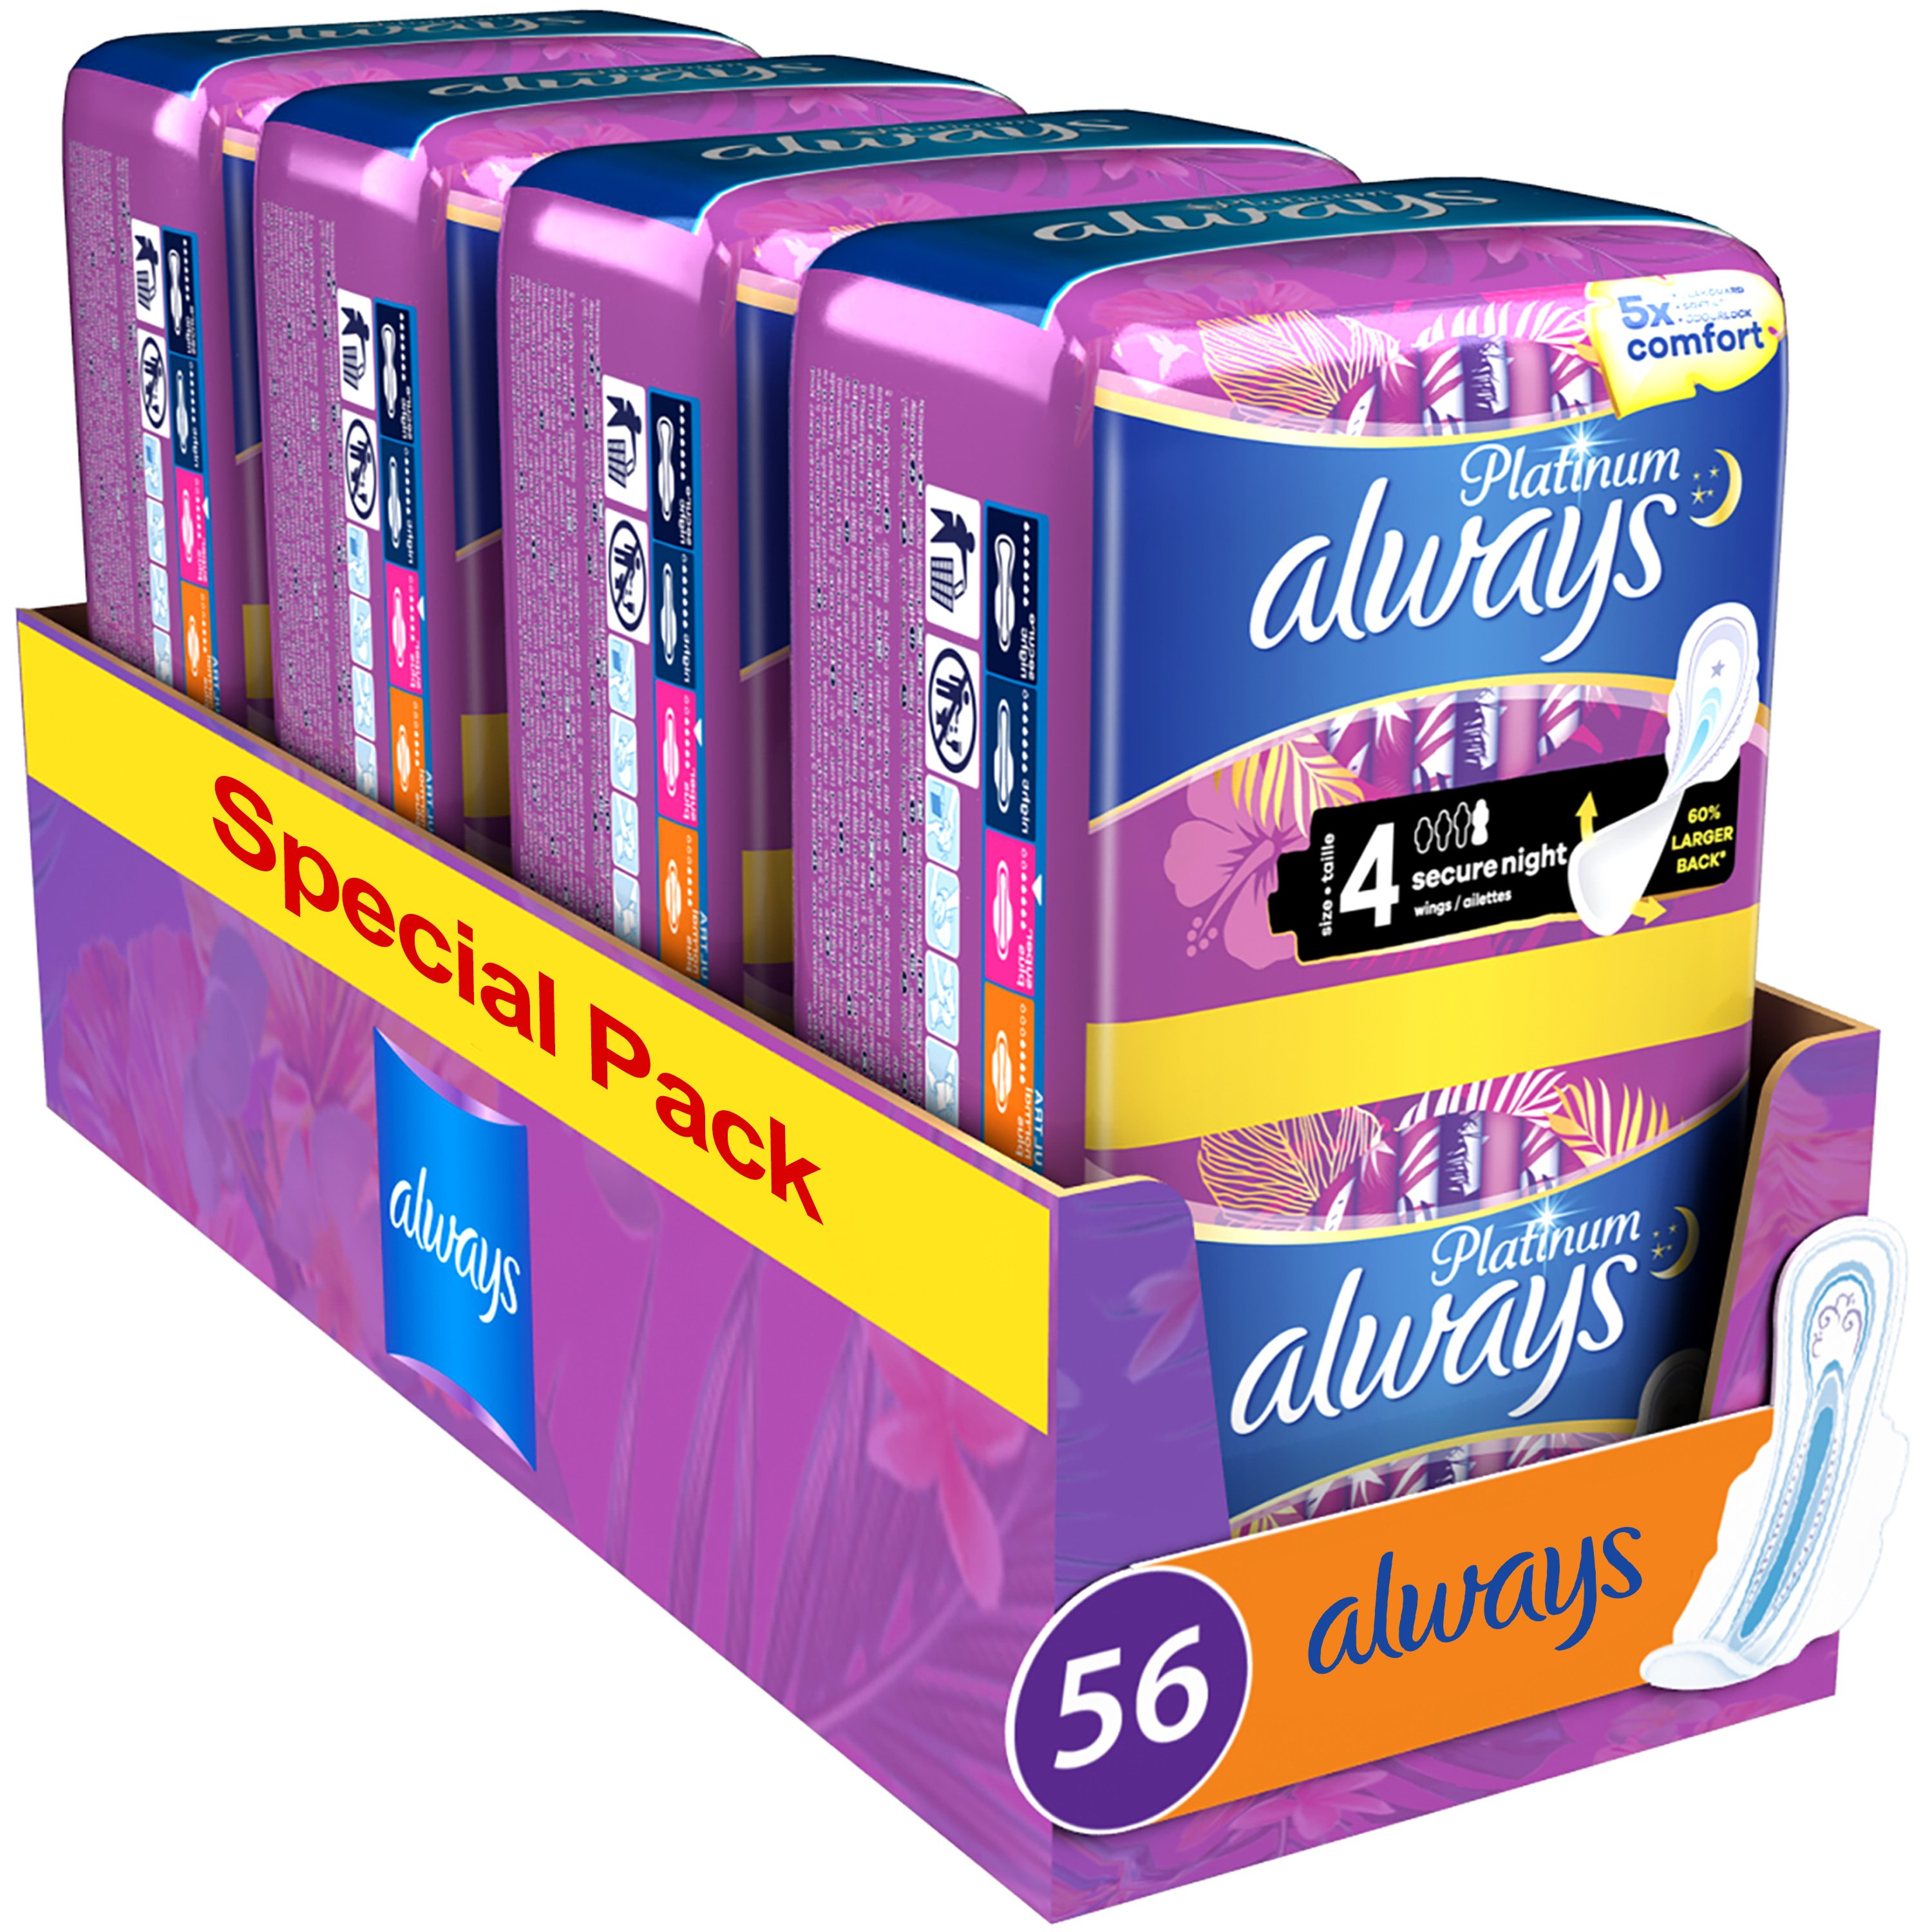 Always Promo Multi-Pack Platinum Secure Night Sanitary Towels with Wings Σερβιέτες με Φτερά για Πενταπλάσια Άνεση & Προστασία τη Νύχτα Size 4, 56 Τεμάχια